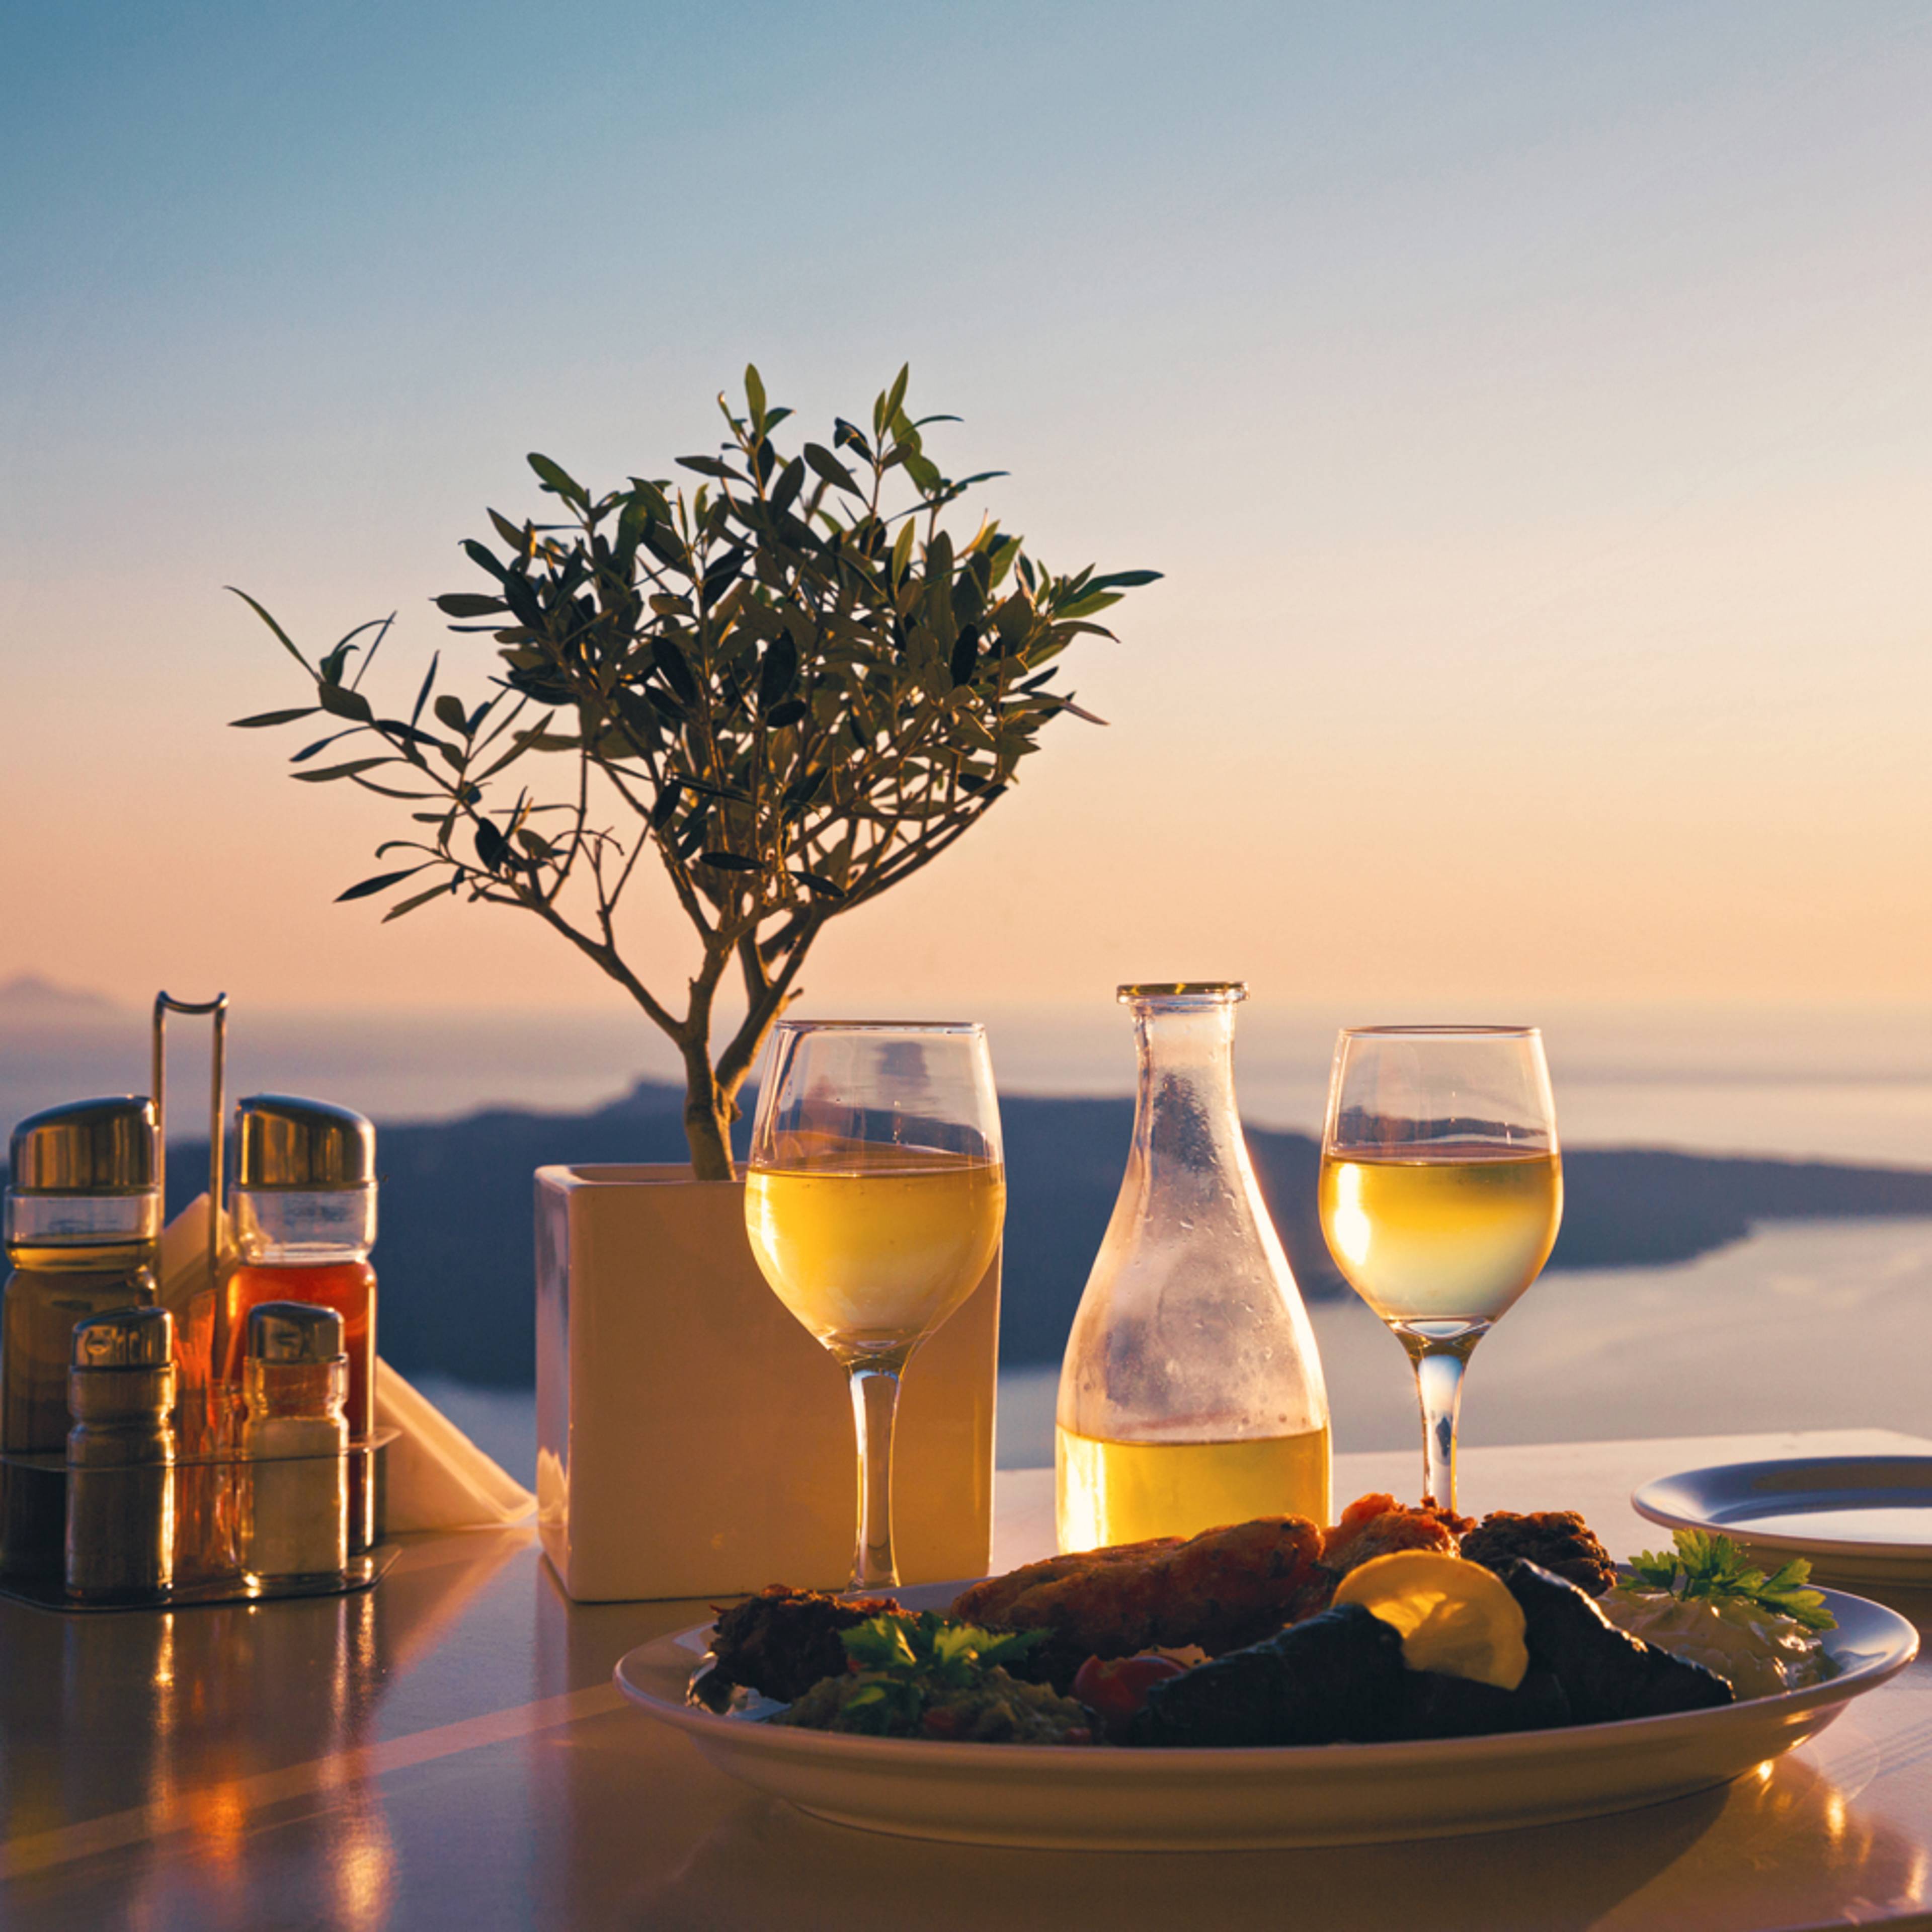 Design your perfect food and wine tour in Greece with a local expert